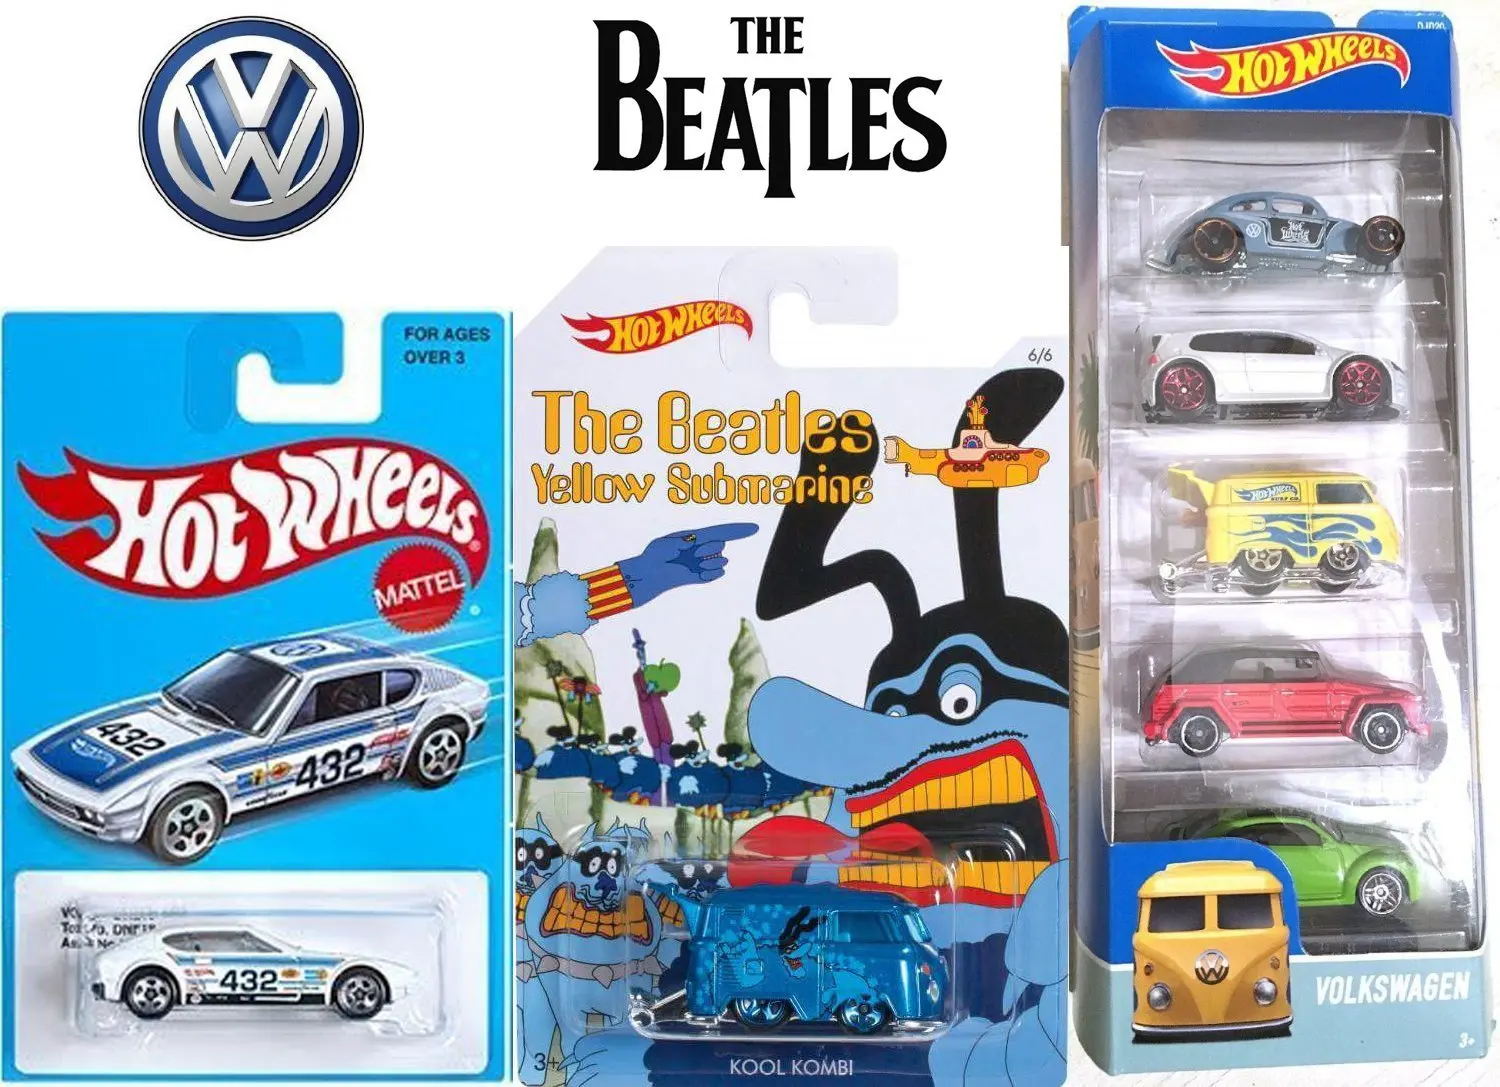 Buy Beatles Hot Wheels Vw Yellow Submarine Series 16 Volkswagen Blue Meanie Kool Kombi Exclusive Sp2 Retro Card 5 Car Set Limited Edition In Cheap Price On Alibaba Com